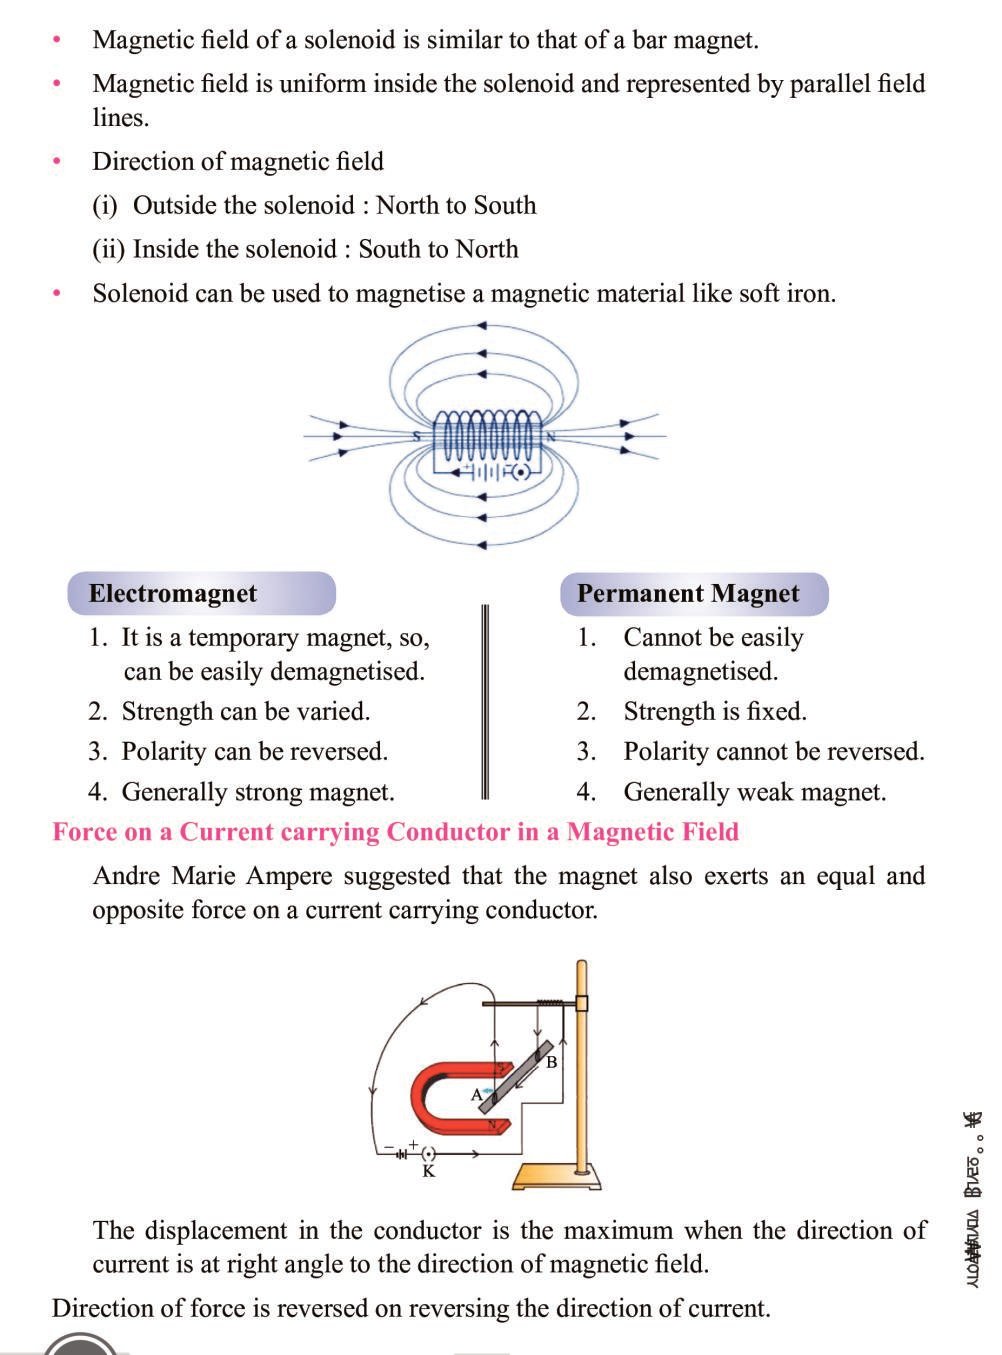 case study class 10 science magnetic effects of electric current